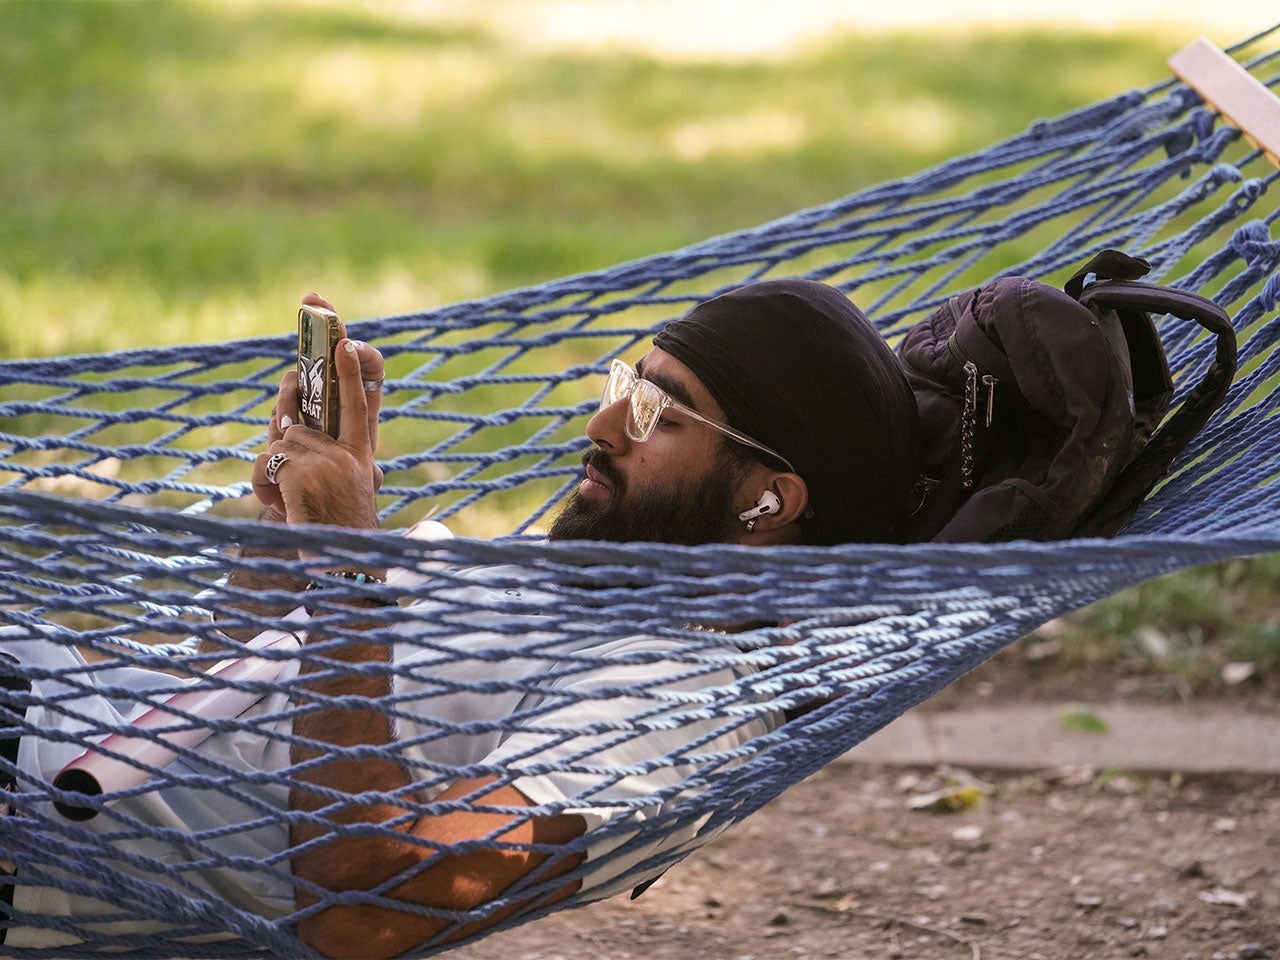 A ˽̳ Davis student scrolls on their phone while swinging in a blue hammock on campus.